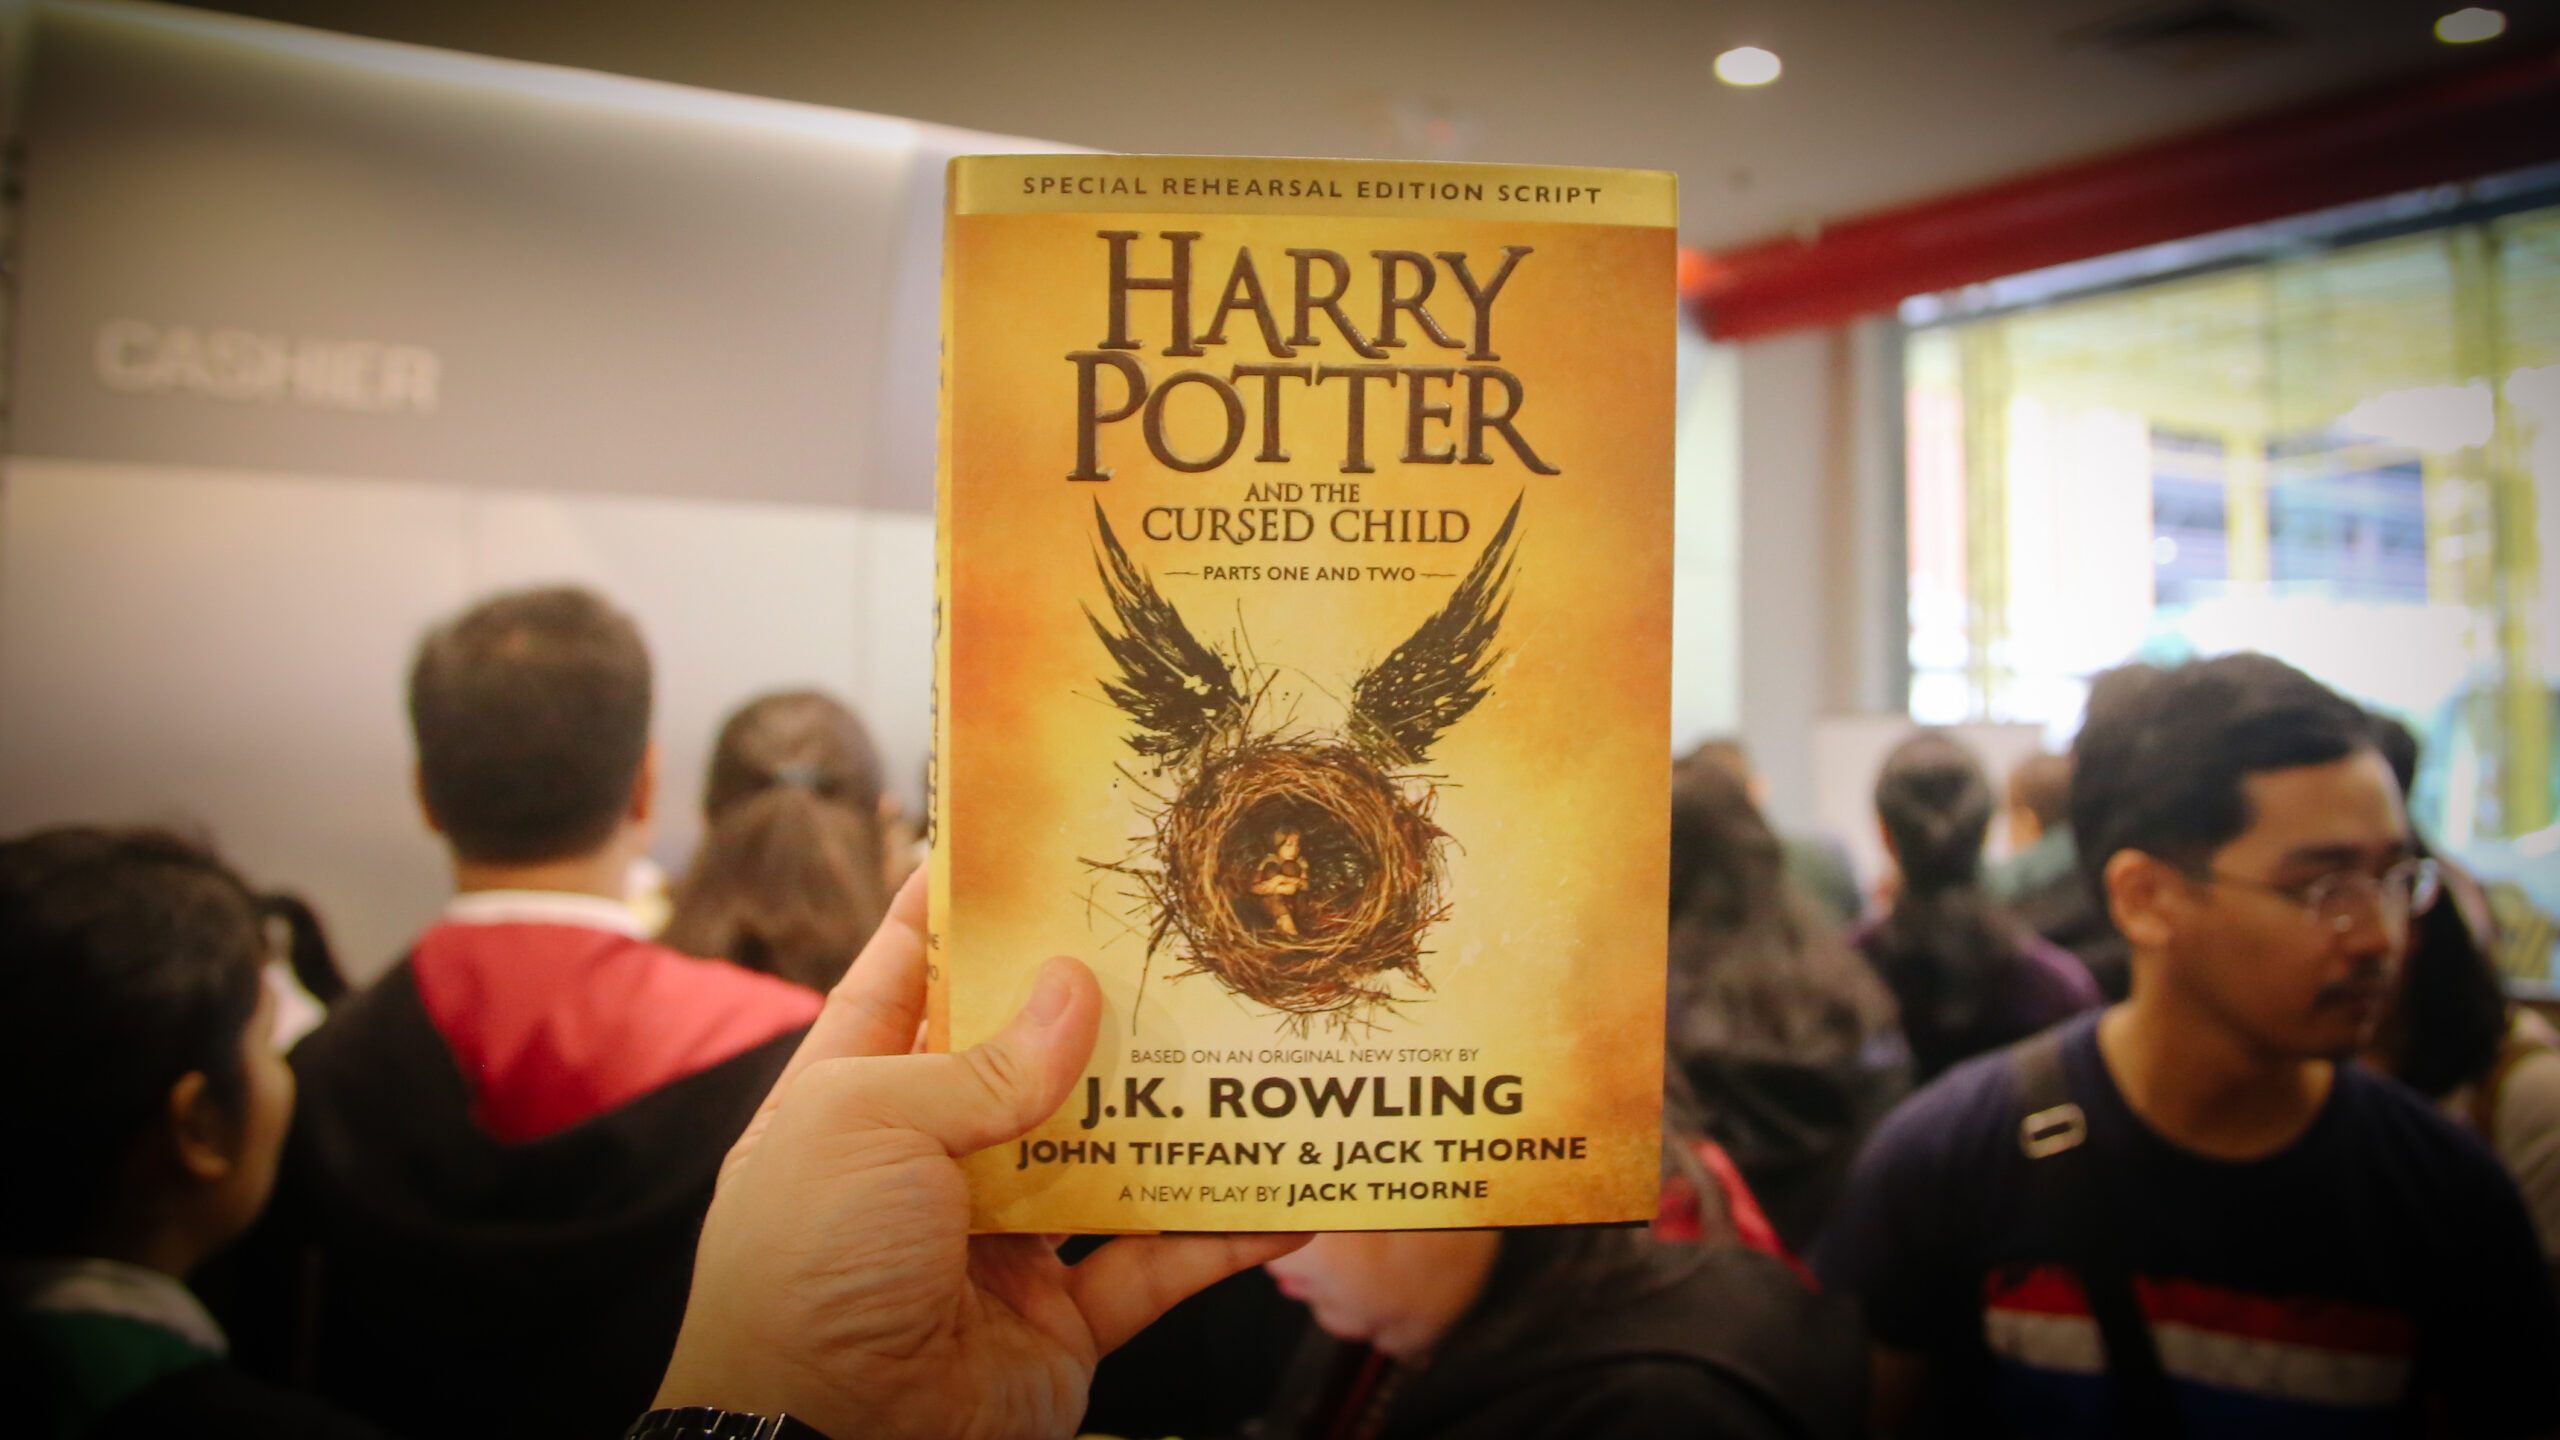 WATCH: ‘Harry Potter’ is back as ‘Cursed Child’ hits bookstores around the world